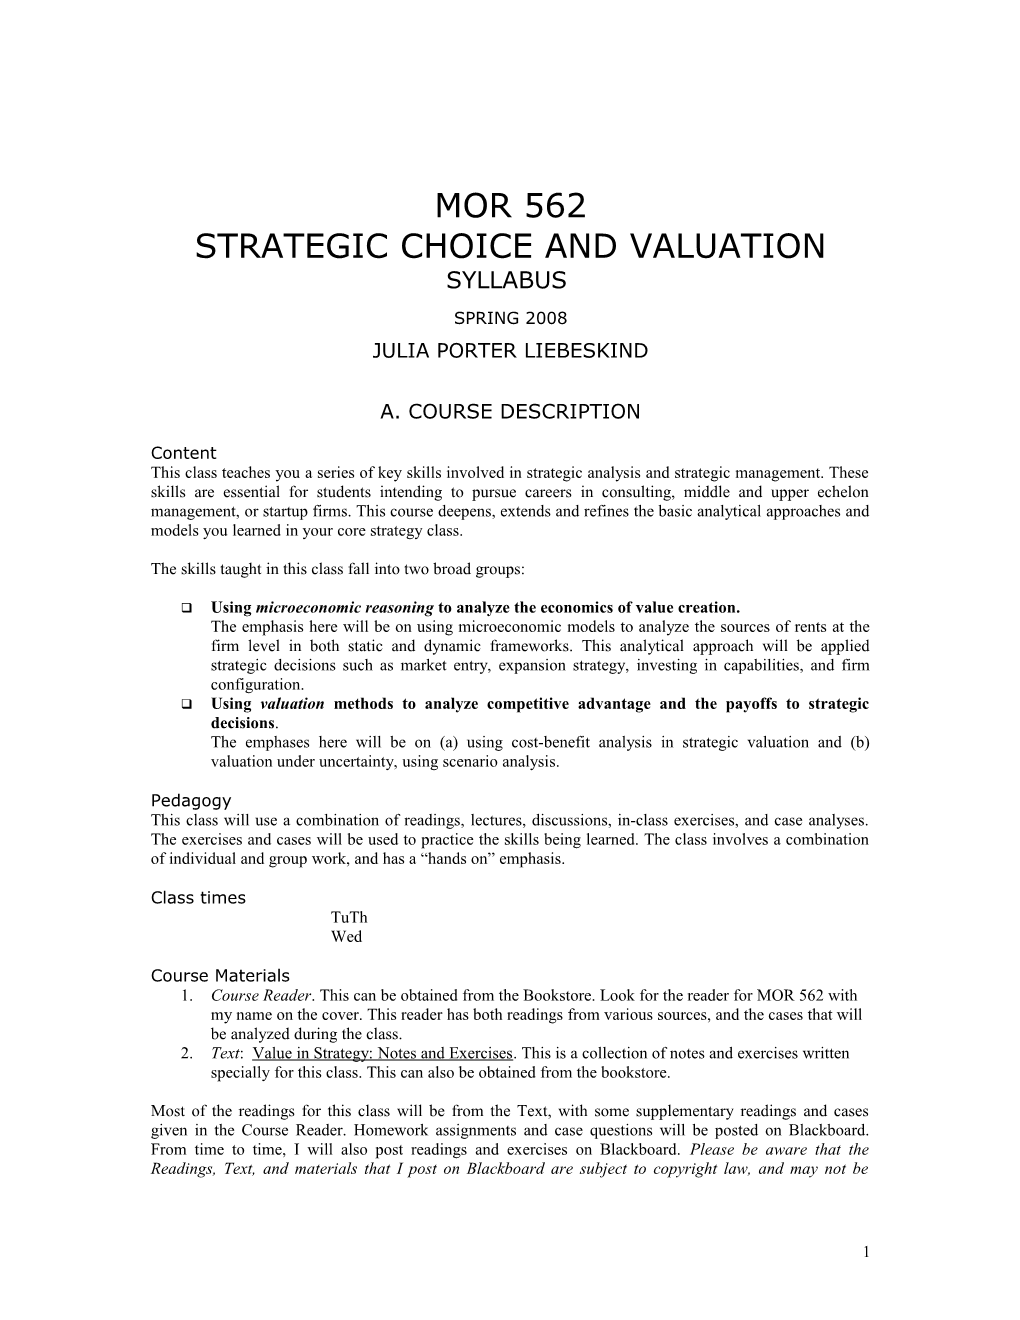 Strategic Choice and Valuation